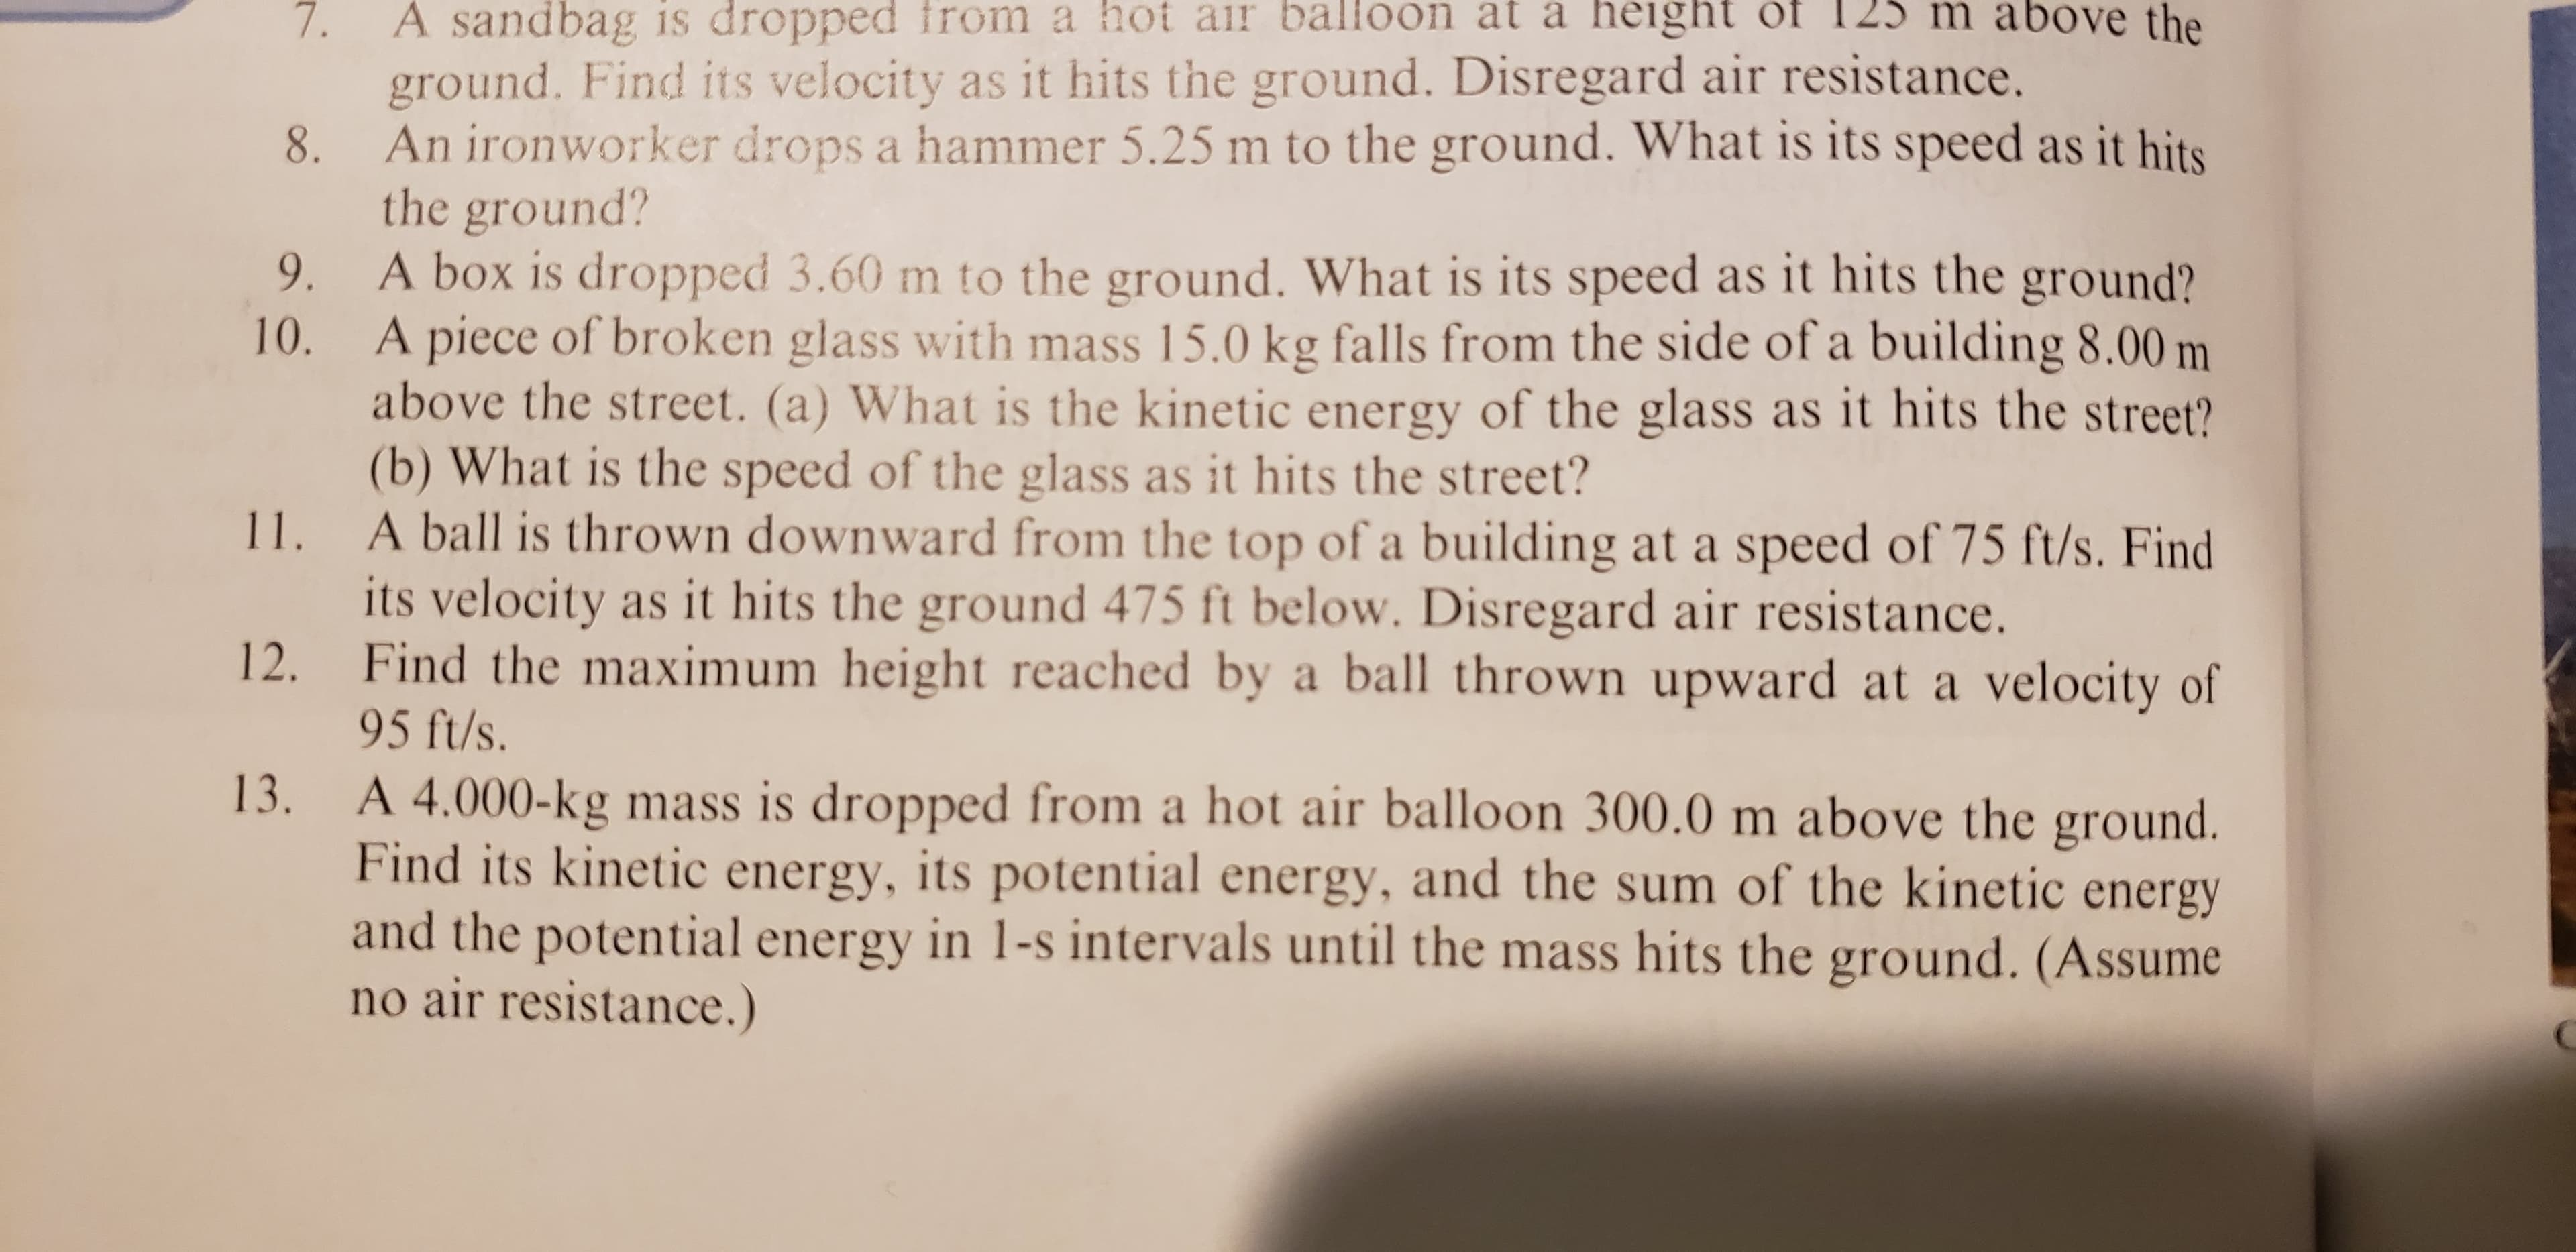 m above the
A sandbag is dropped fro
m a hot ai balloon at a height of 12
ground. Find its velocity as it hits the ground. Disregard air resistance.
An ironworker drops a hammer 5.25 m to the ground. What is its speed as it hits
the ground?
A box is dropped 3.60 m to the ground. What is its speed as it hits the ground?
A piece of broken glass with mass 15.0 kg falls from the side of a building 8.00 m
above the street. (a) What is the kinetic energy of the glass as it hits the street?
(b) What is the speed of the glass as it hits the street?
11. A ball is thrown downward from the top of a building at a speed of 75 ft/s. Find
its velocity as it hits the ground 475 ft below. Disregard air resistance.
12. Find the maximum height reached by a ball thrown upward at a velocity of
95 ft/s
13. A 4.000-kg mass is dropped from a hot air balloon 300.0 m above the ground.
Find its kinetic energy, its potential energy, and the sum of the kinetic energy
and the potential energy in 1-s intervals until the mass hits the ground. (Assume
no air resistance.)
8.
9.
10.
77
